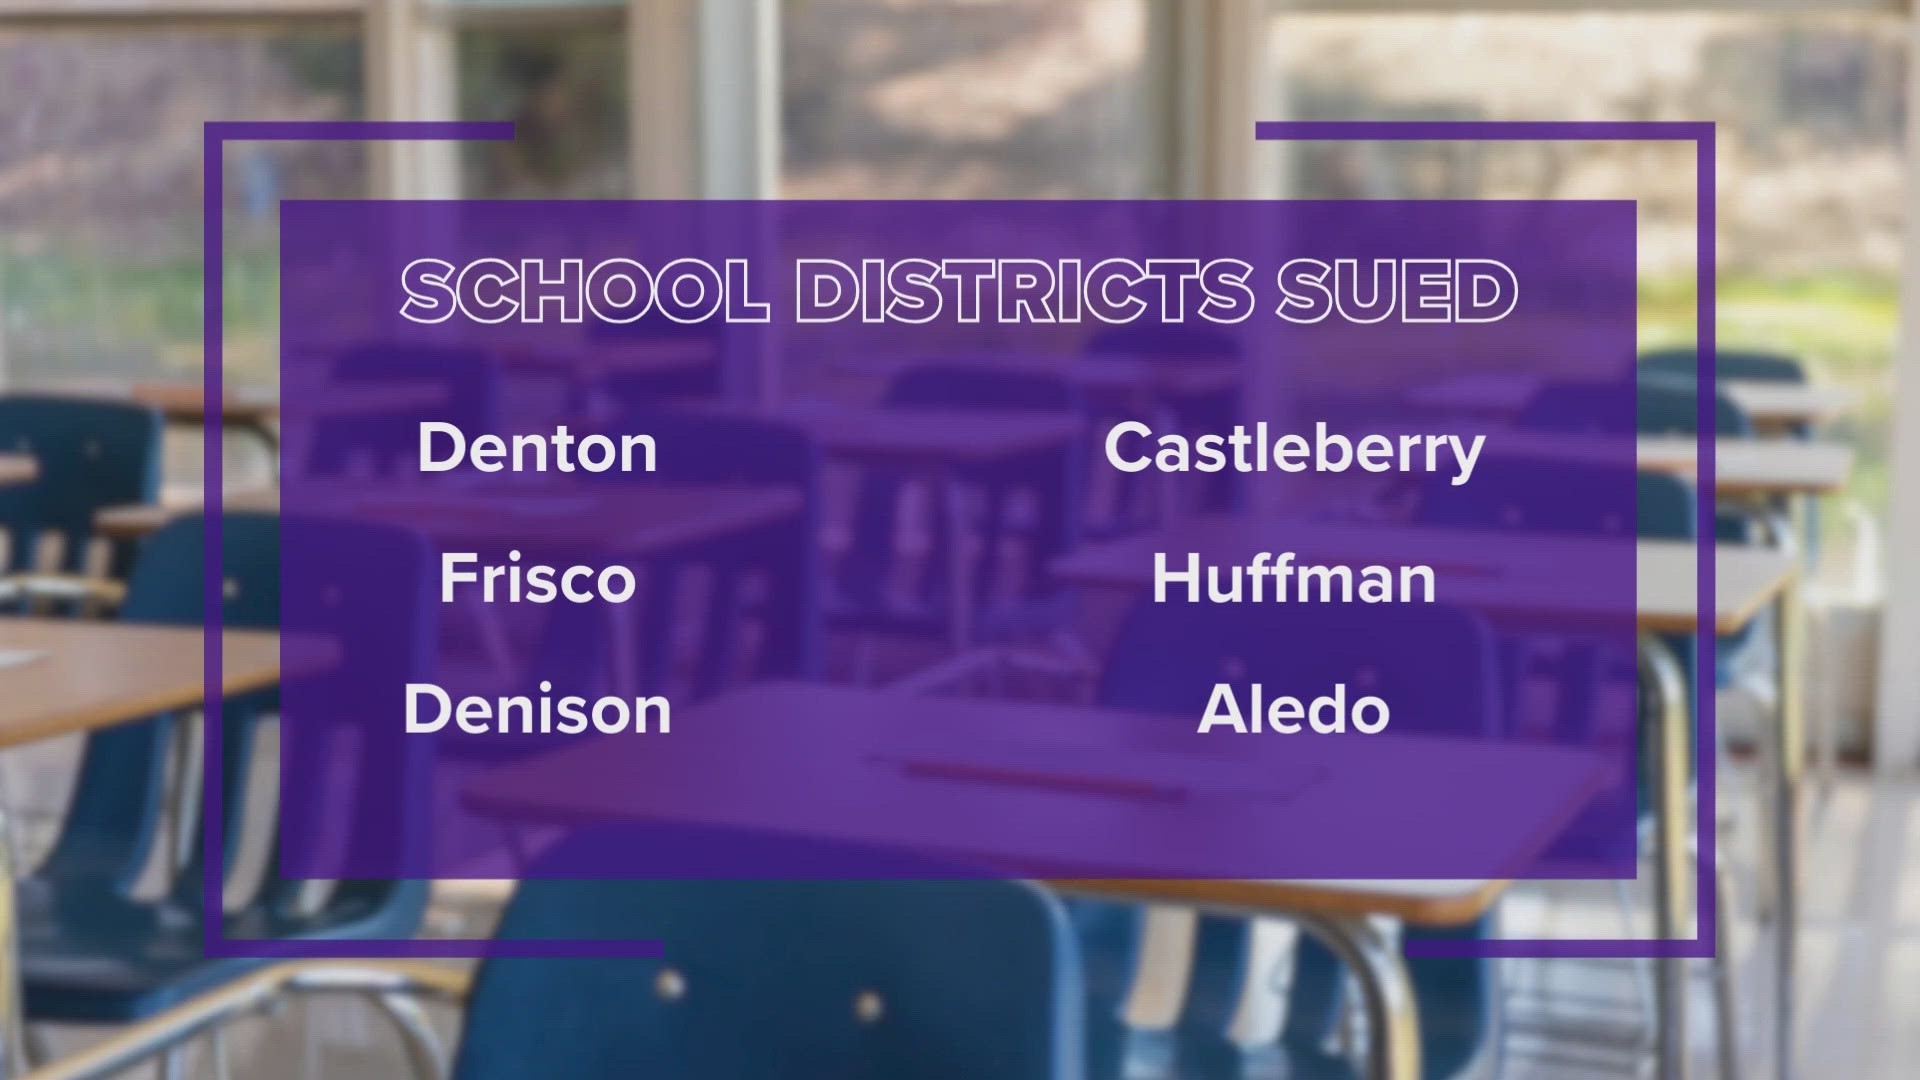 Five North Texas school districts are now being sued by Paxton over electioneering claims.